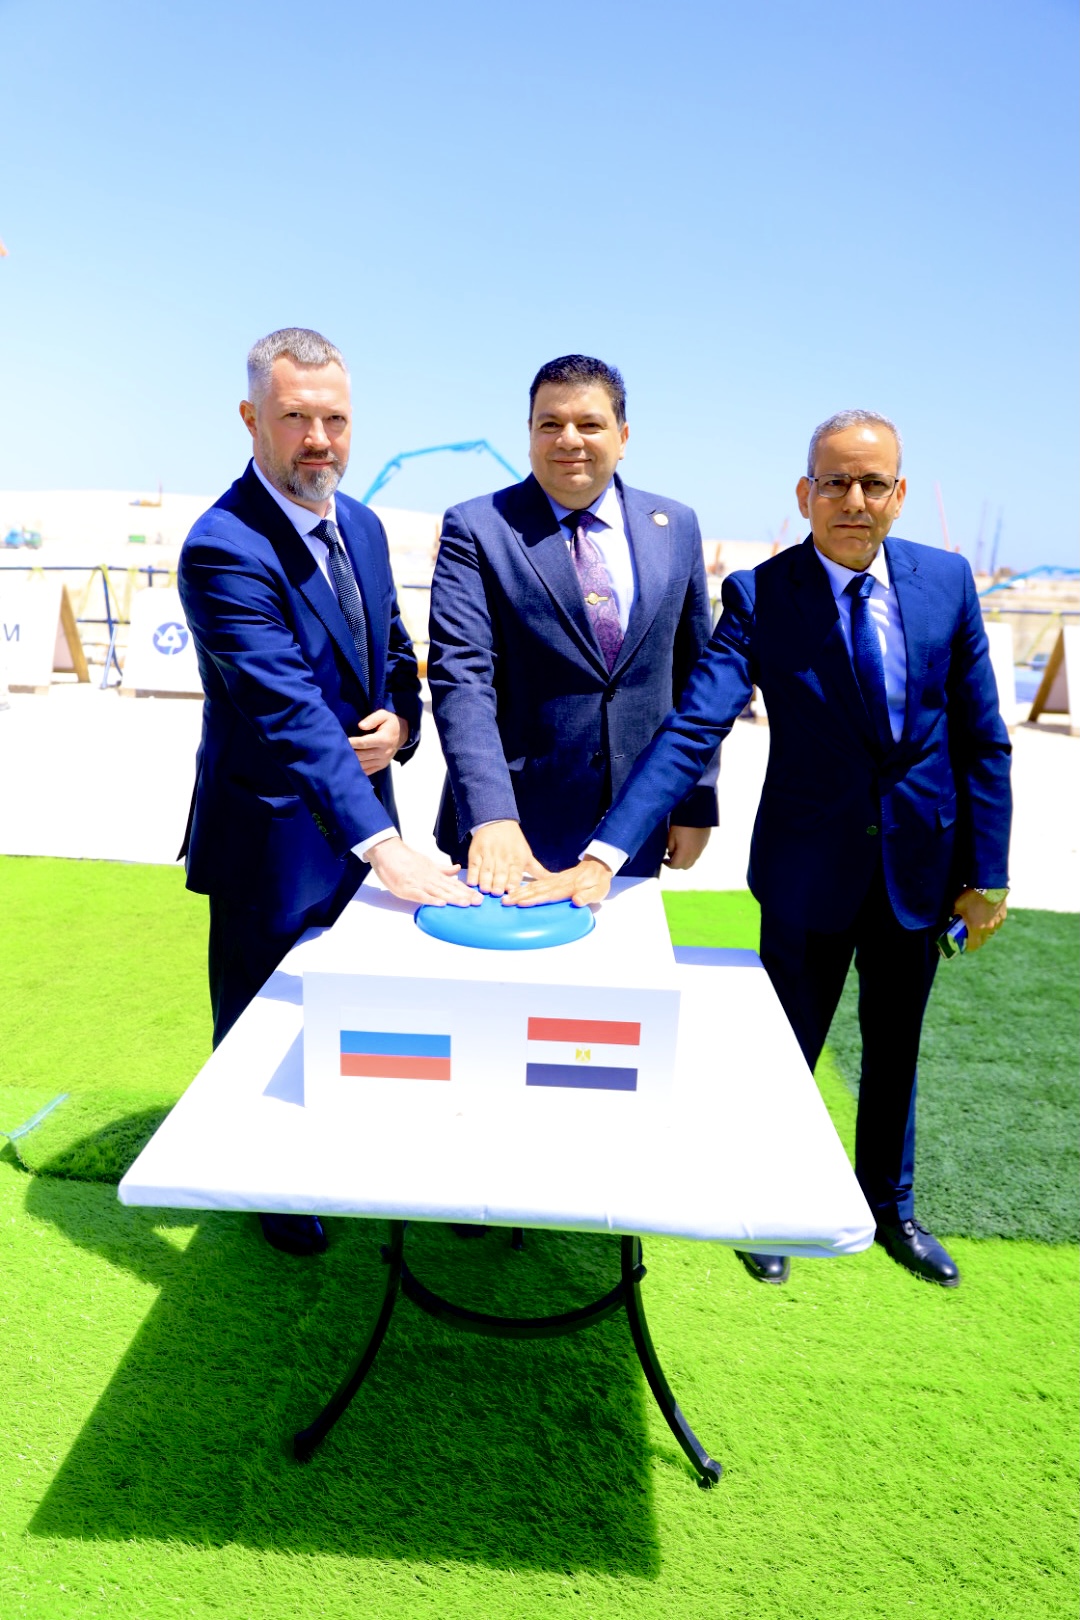 Main Construction Phase for Unit 3 of El-Dabaa Nuclear Power Plant Commences in Egypt